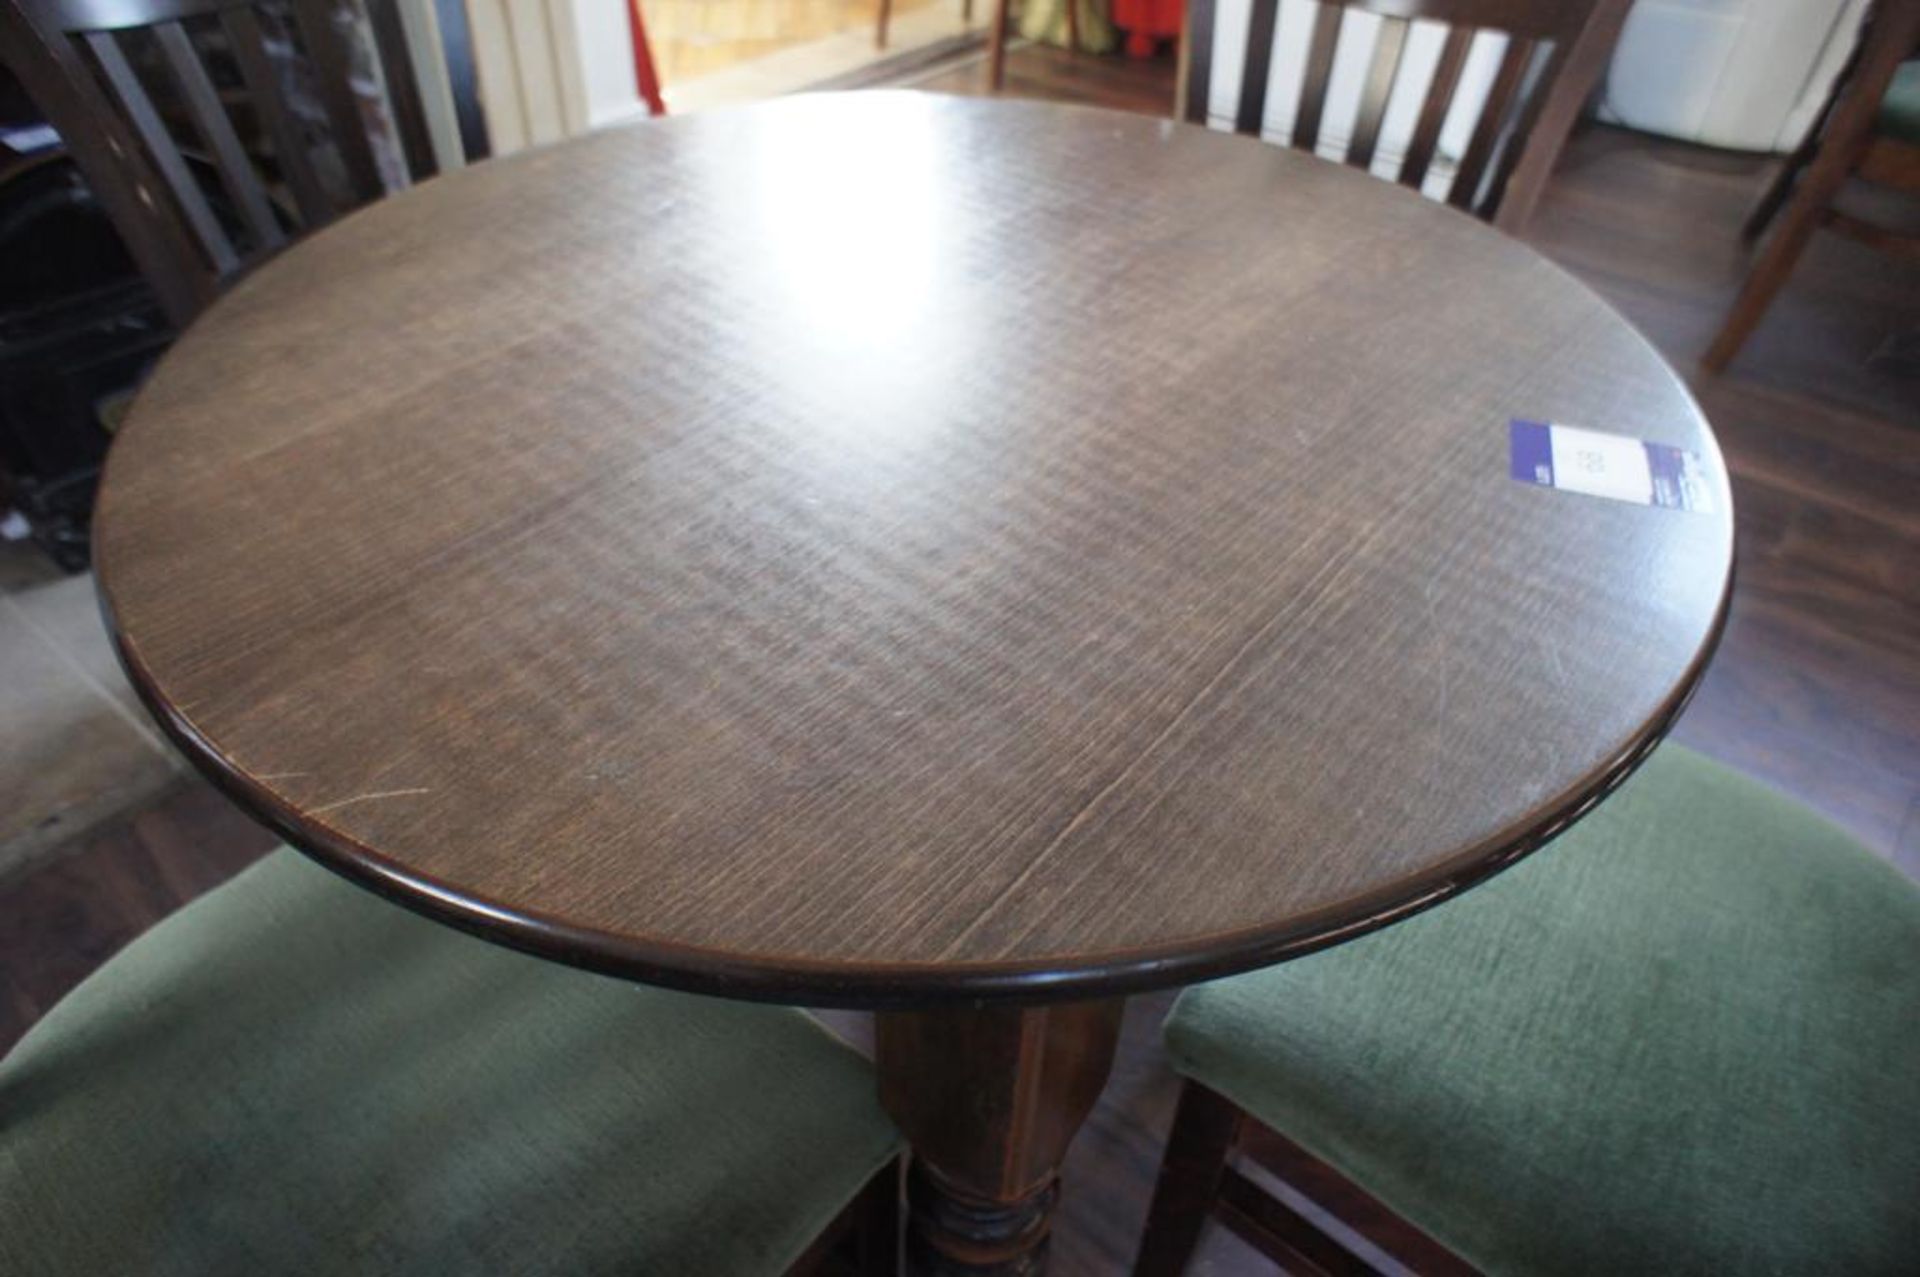 Oak Effect Circular Table 900mm Diameter with 4 x Oak Effect Part Upholstered Chairs - Image 2 of 3